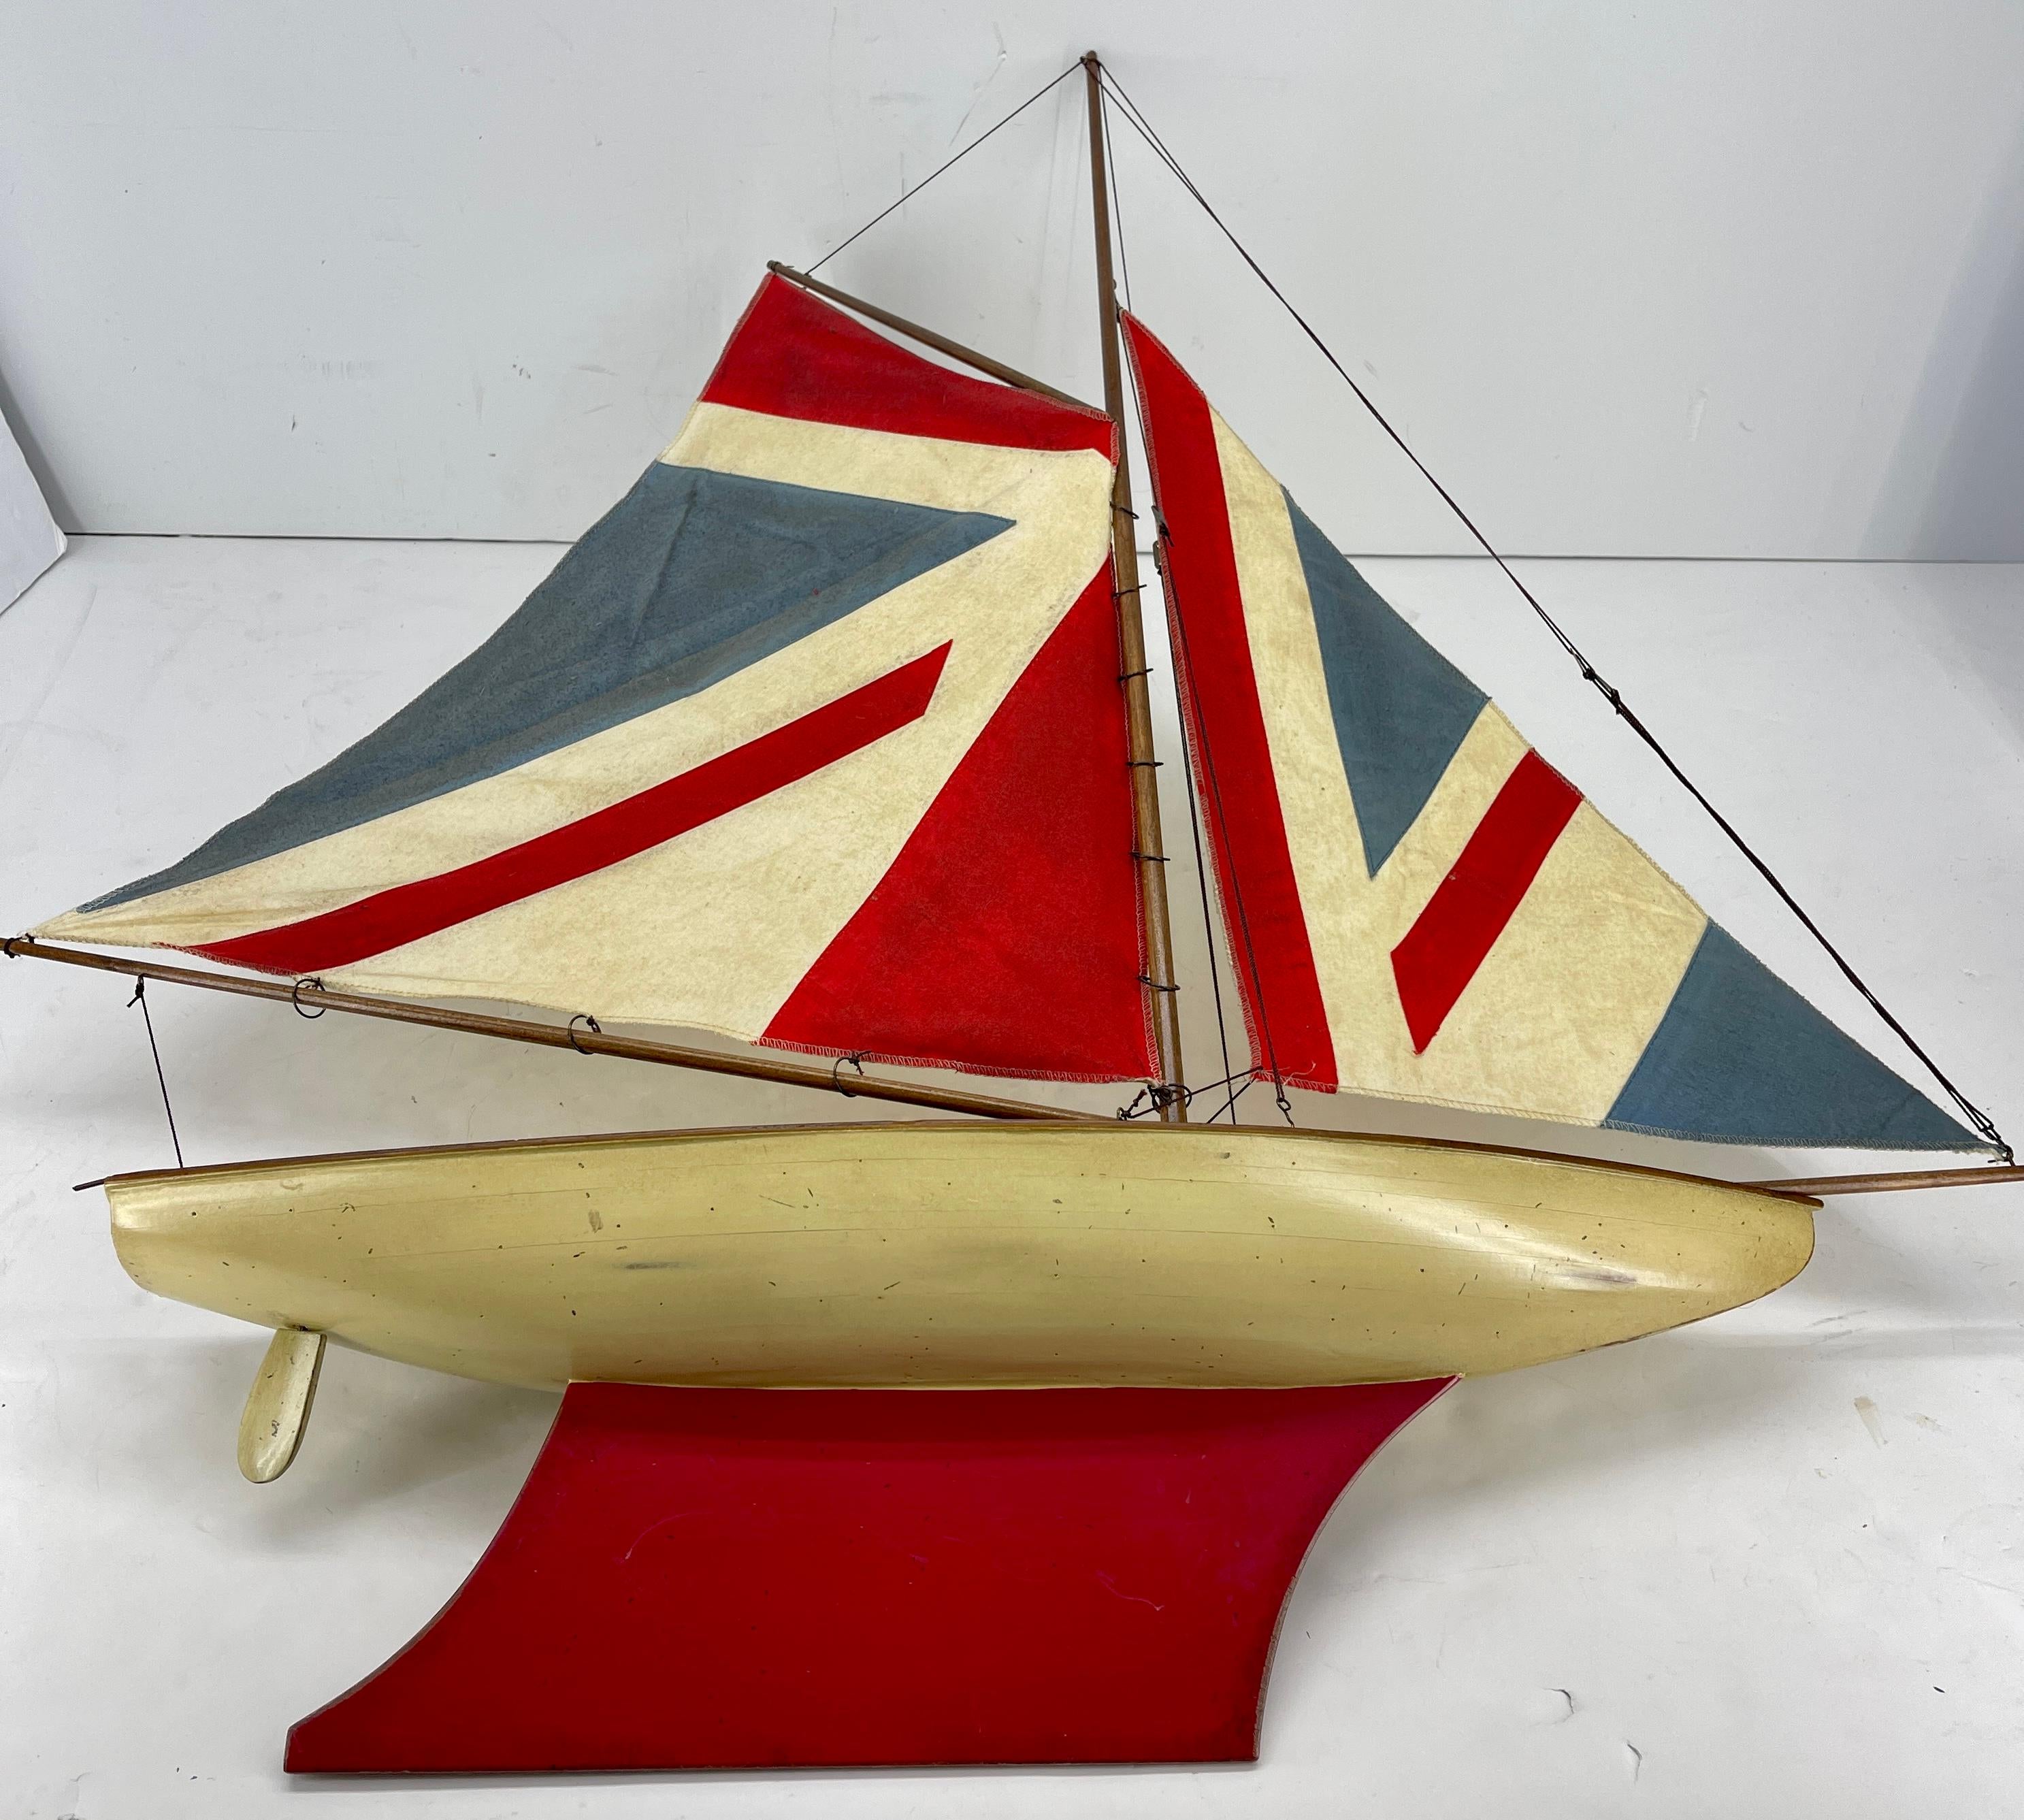 English Carved Wood Sailboat Model with Parquetry Deck and Union Jack Sailcloth 11